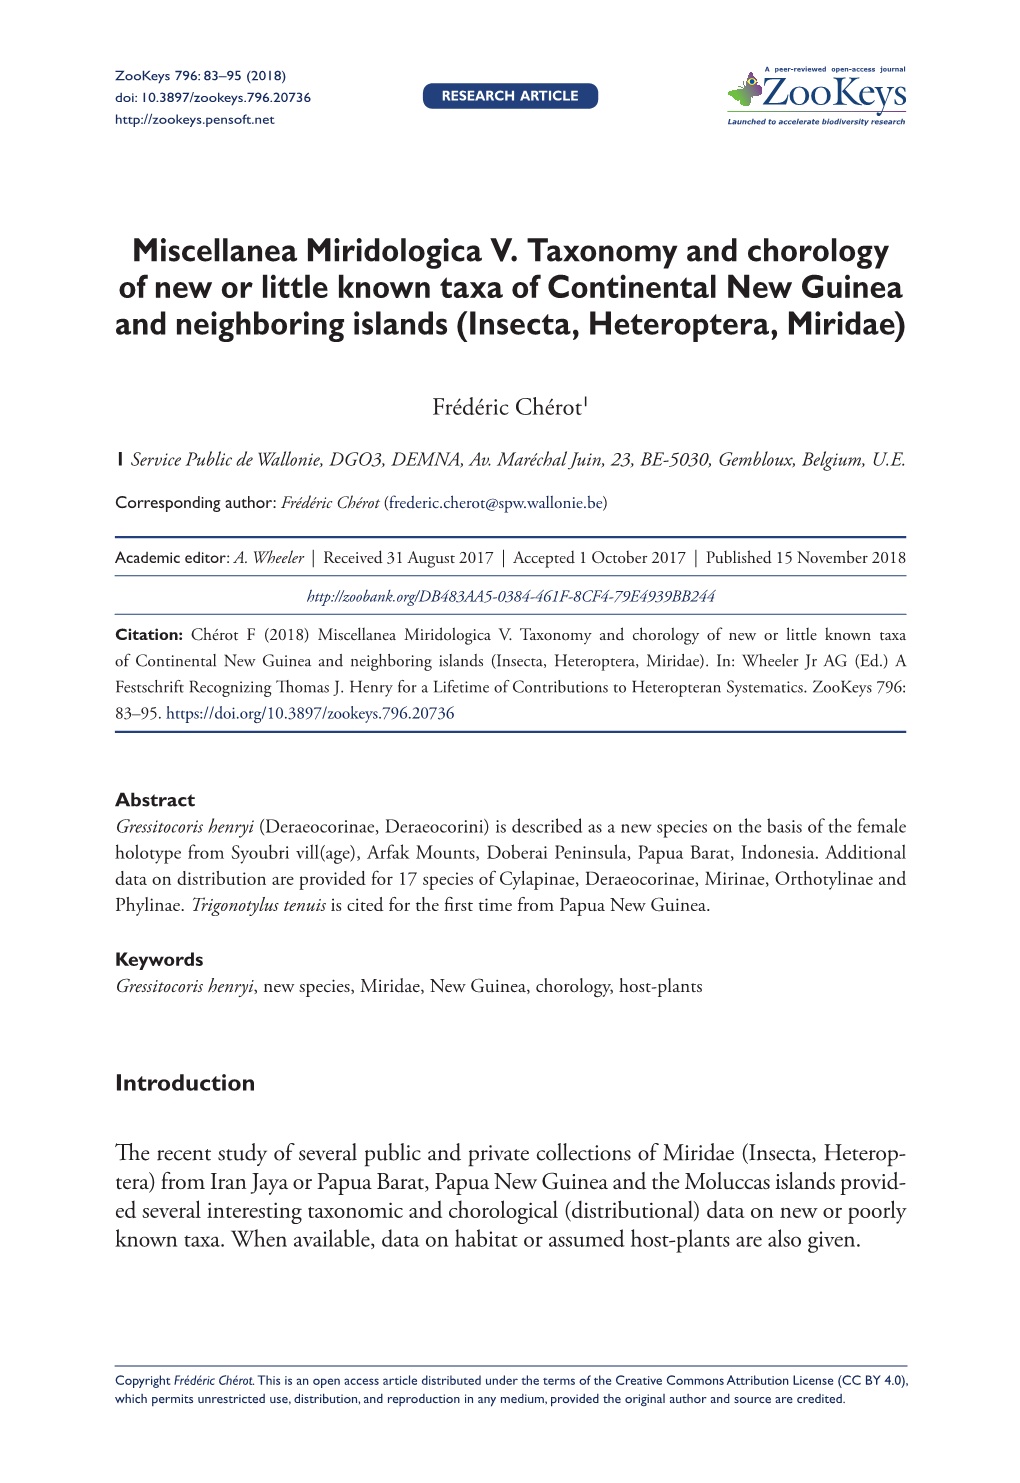 Miscellanea Miridologica V. Taxonomy and Chorology of New Or Little Known Taxa of Continental New Guinea and Neighboring Islands (Insecta, Heteroptera, Miridae)